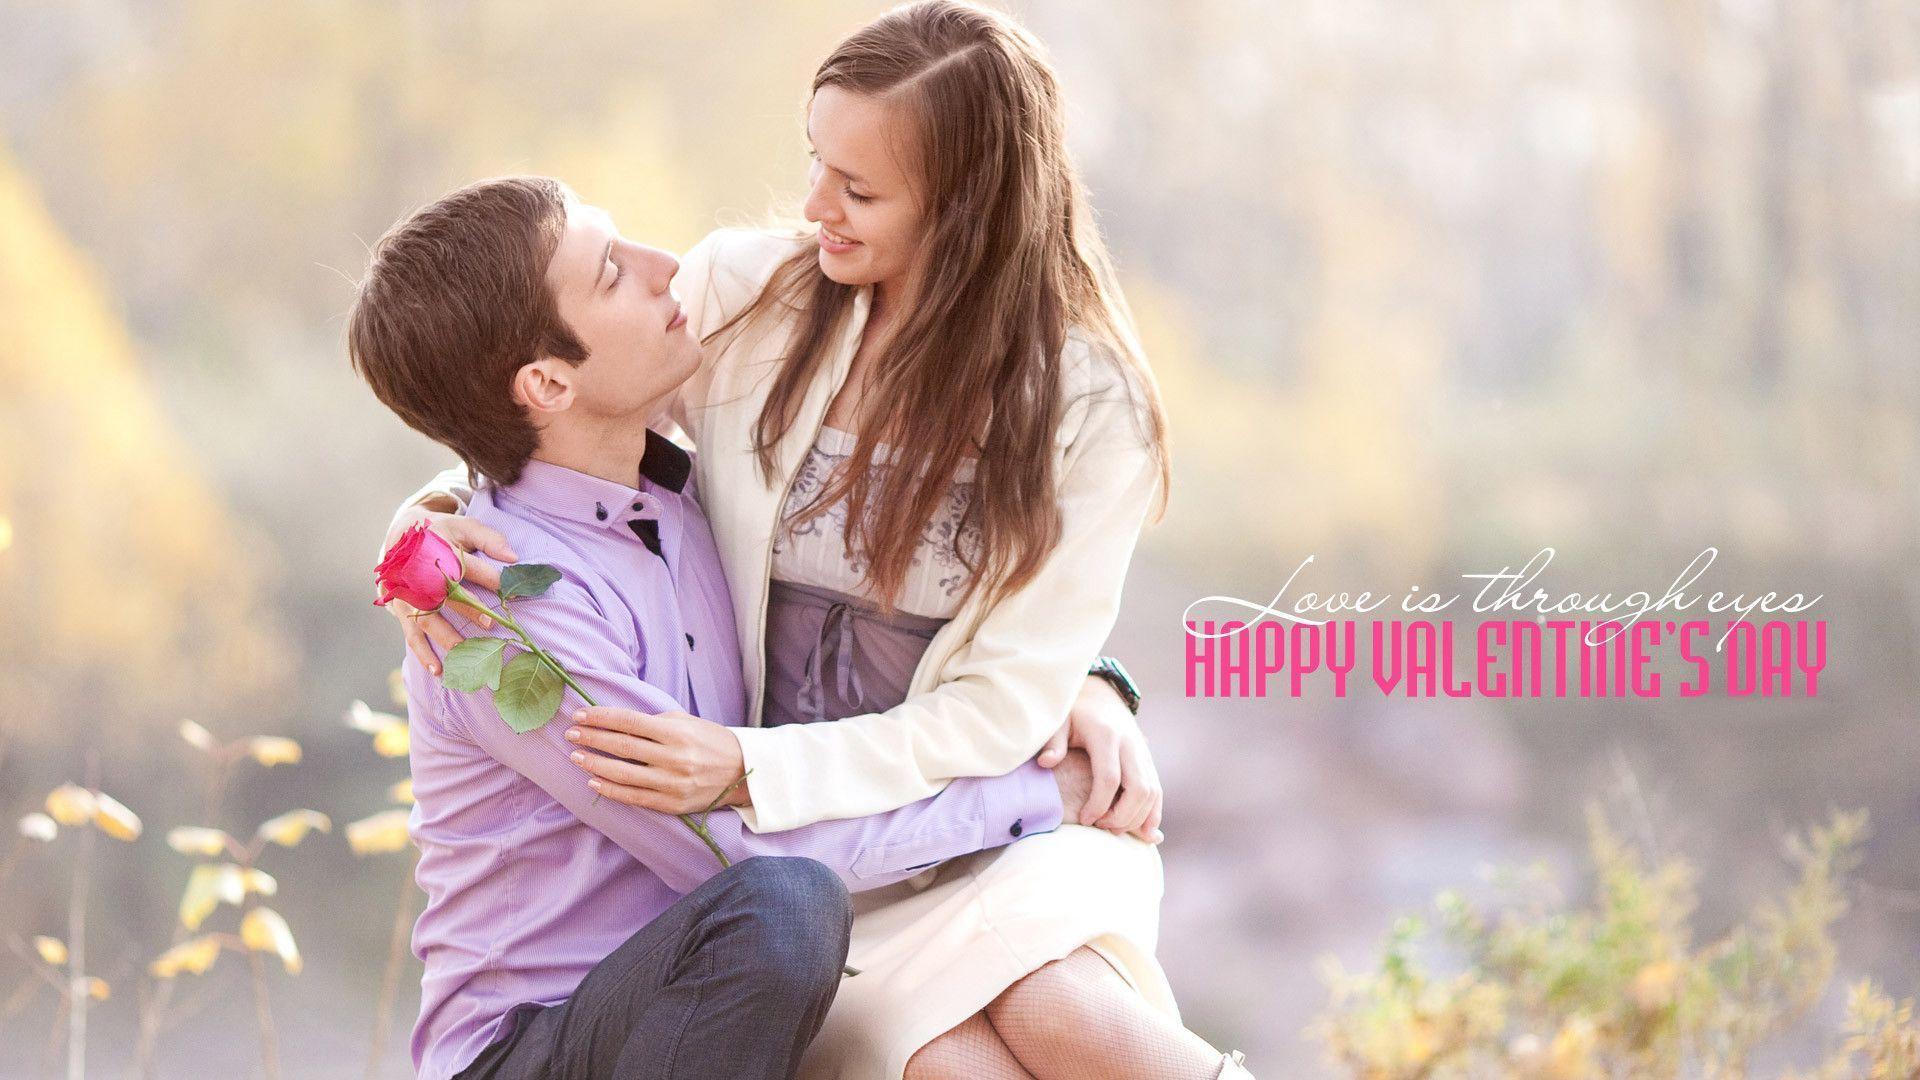 Wishes Happy Valentines Day Hd Wallpaper Of Love Couple. HD